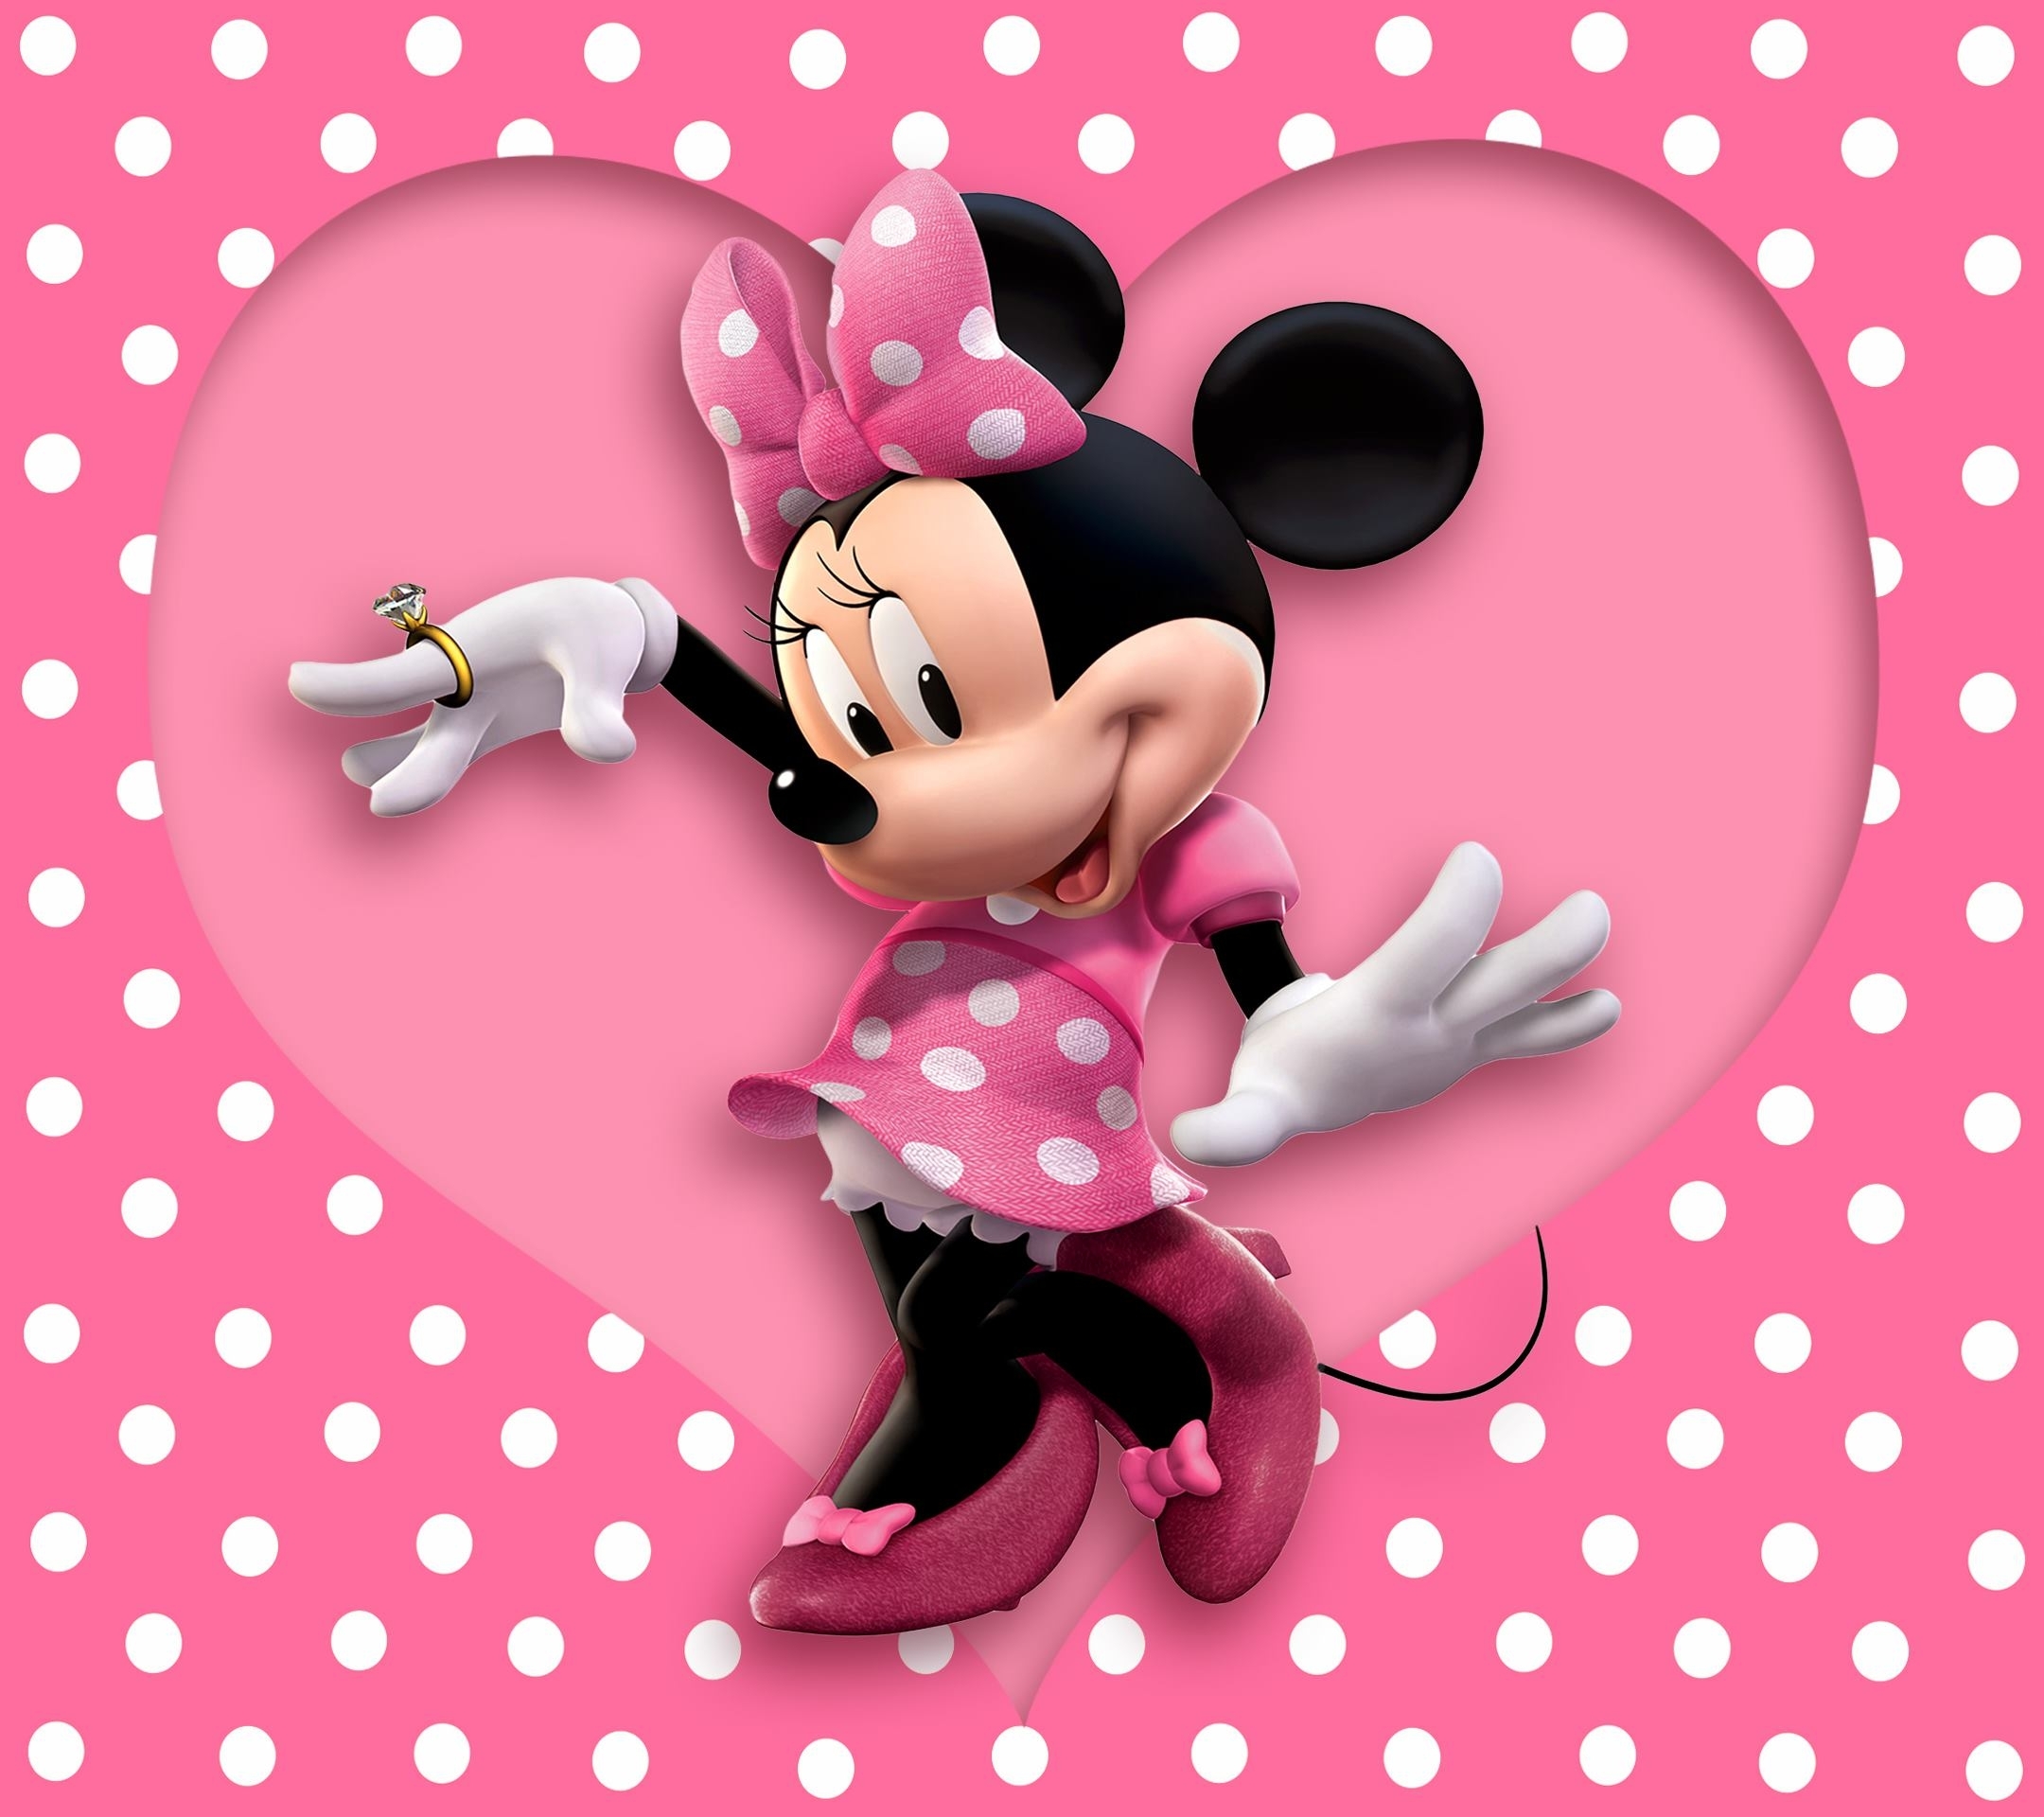 10 Best Minnie Mouse Wallpapers Free FULL HD 1920×1080 For PC Background